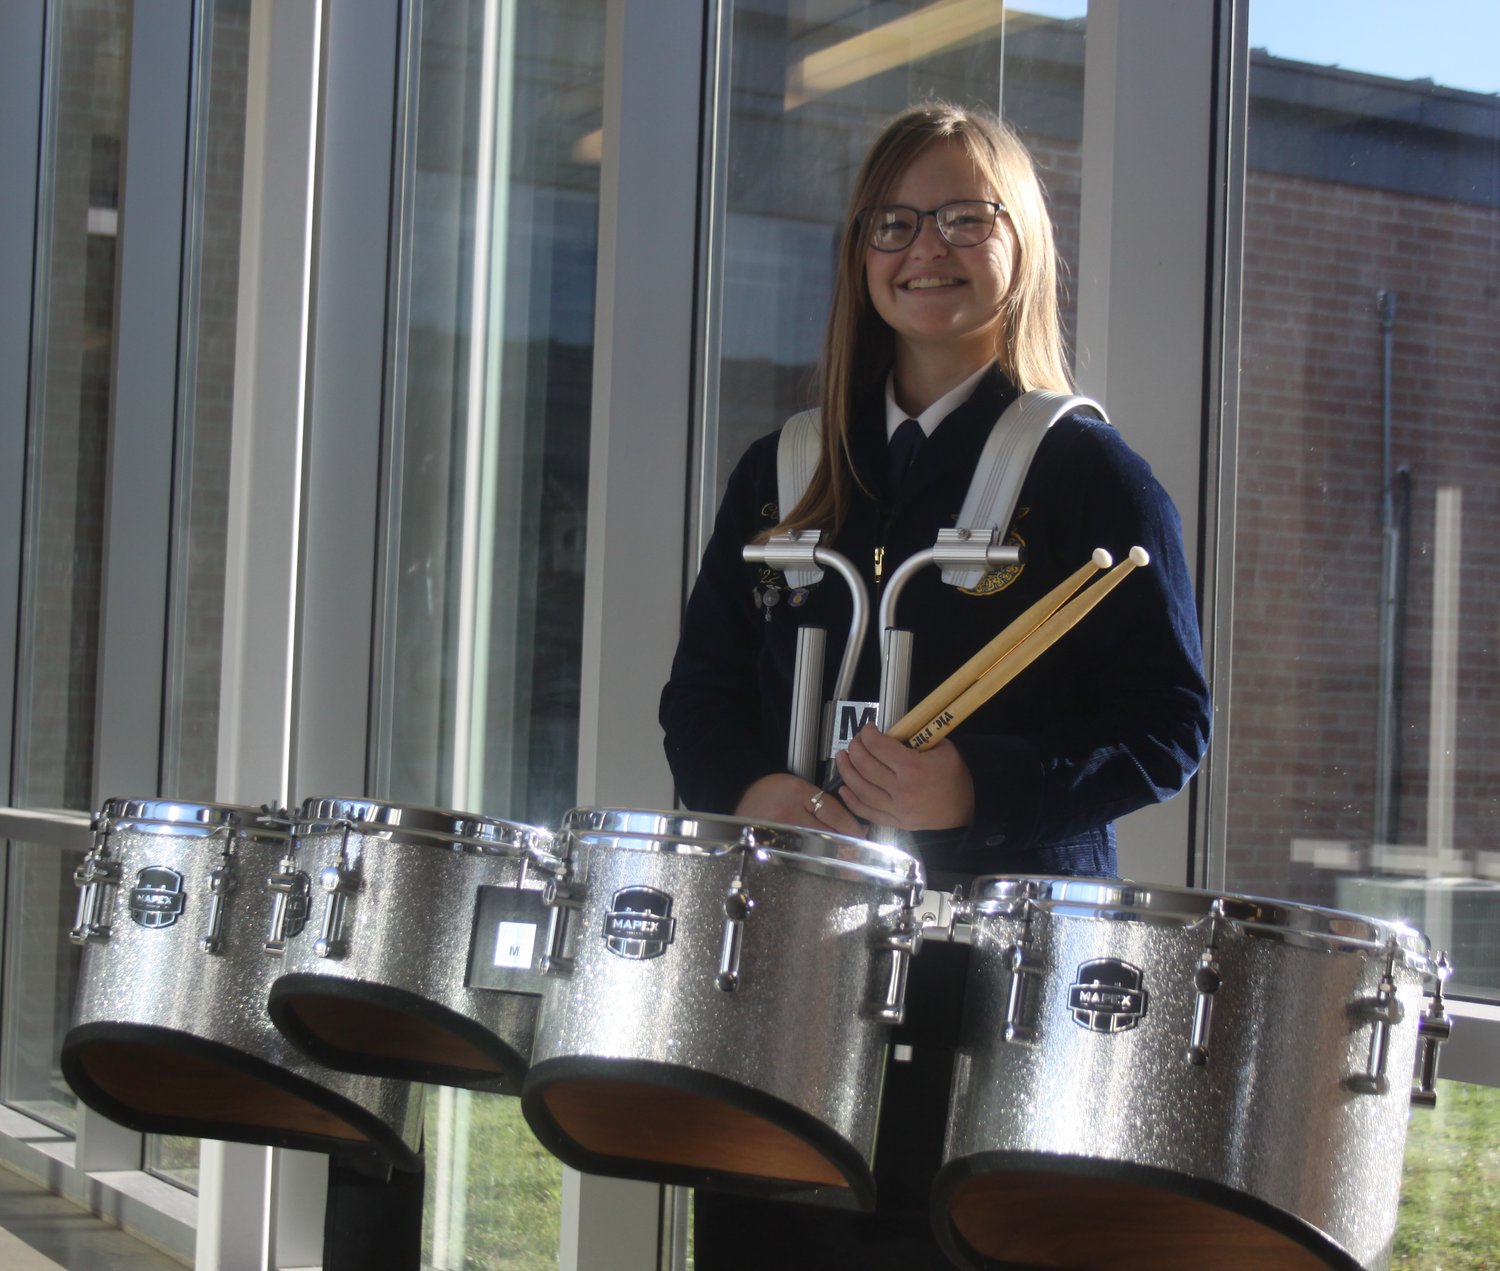 Montgomery County senior Cora Johnson poses with her drums at Montgomery County High School. She played for the National FFA band for the second year in a row at the National FFA Convention & Expo on Oct. 26-29 in Indianapolis.